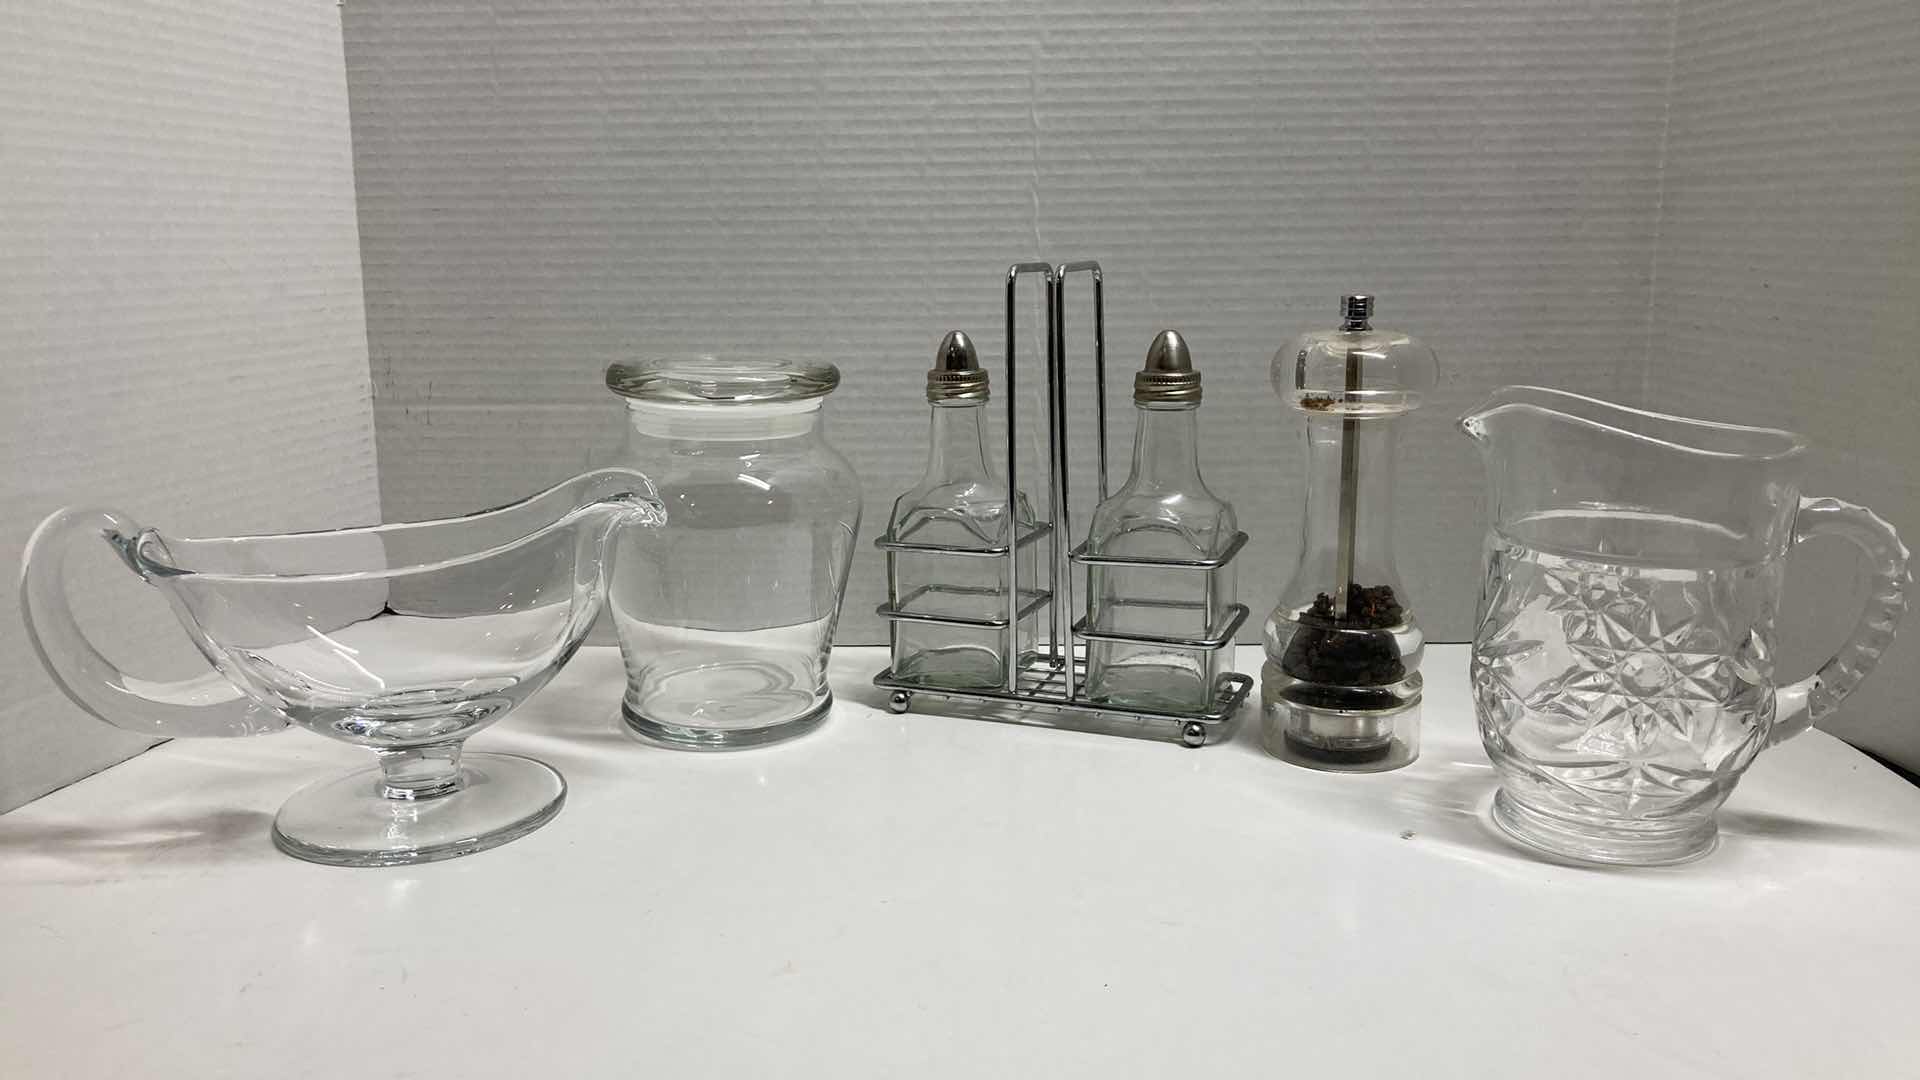 Photo 1 of CLEAR GLASS SERVING DISHES (3) W SALT & PEPPER SHAKERS W CADDY & PLASTIC PEPPERCORN GRINDER